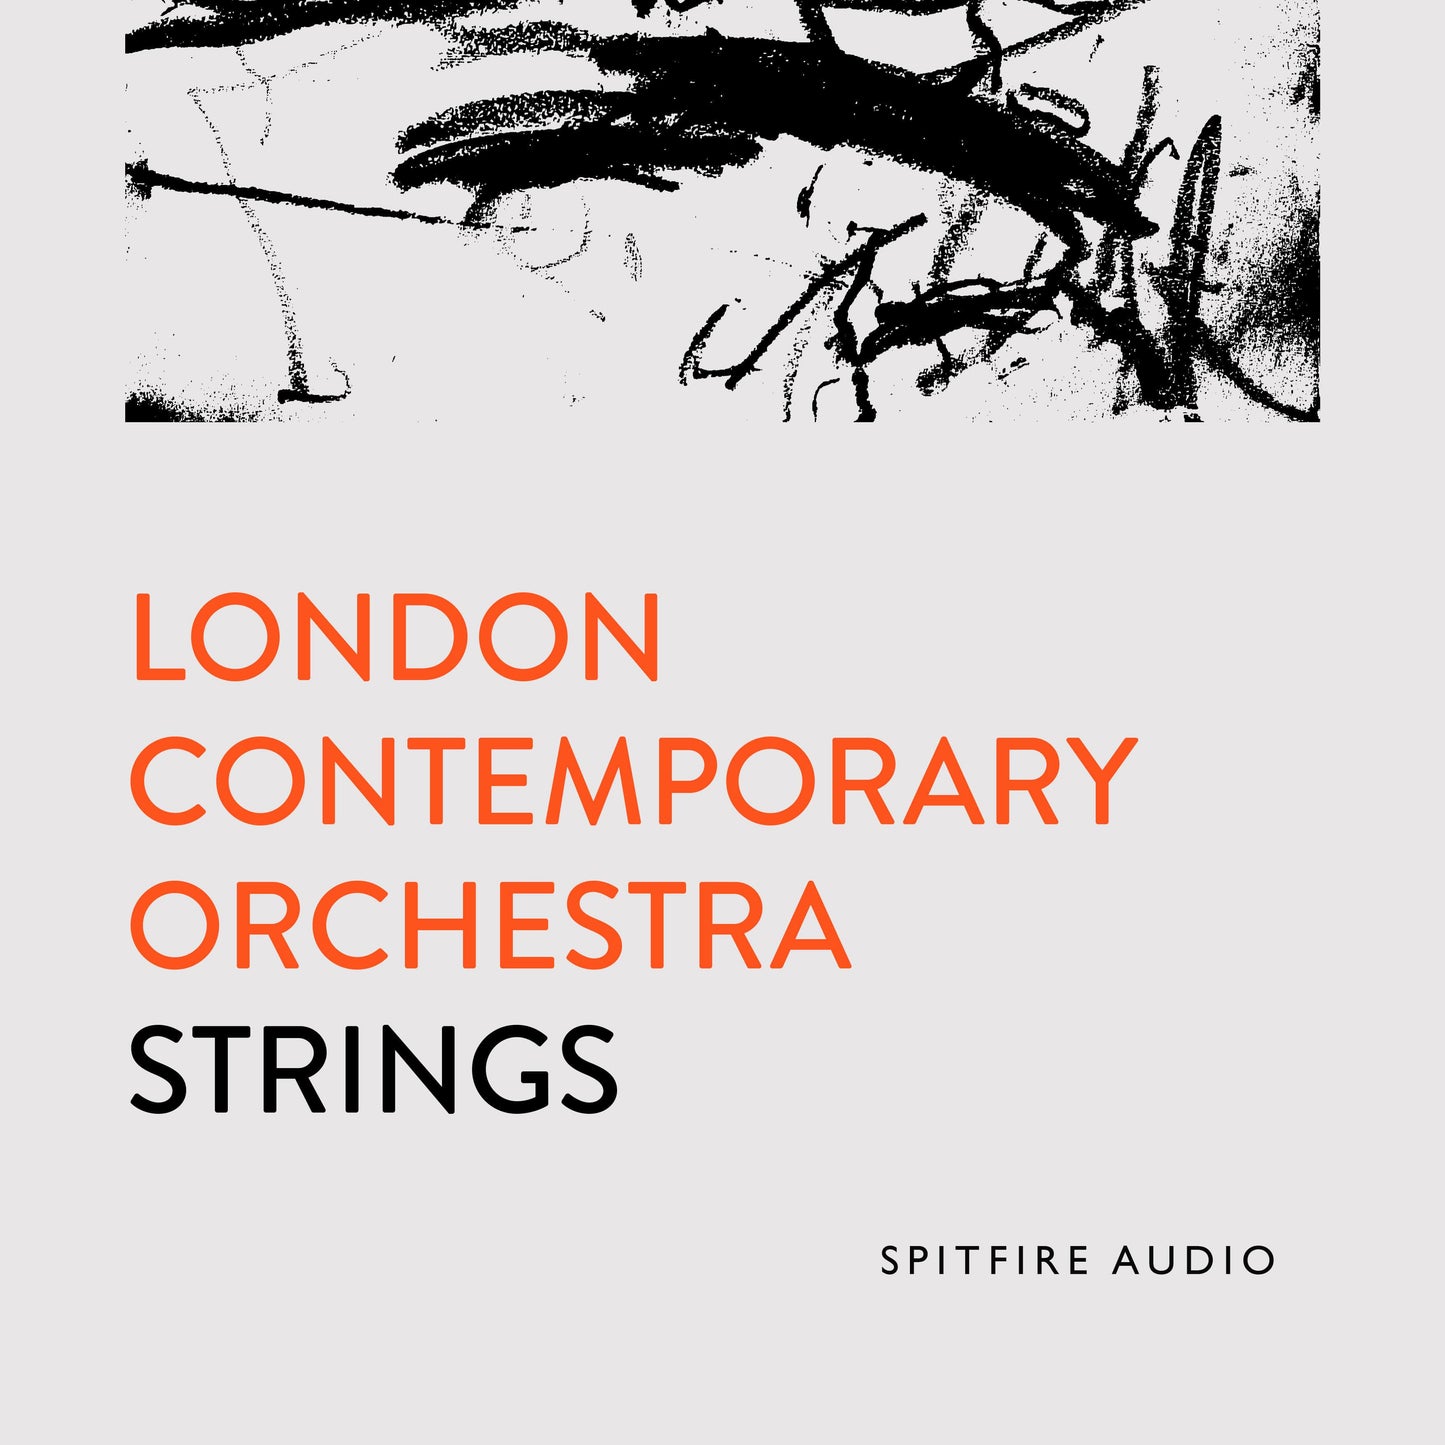 London Contemporary Orchestra Strings